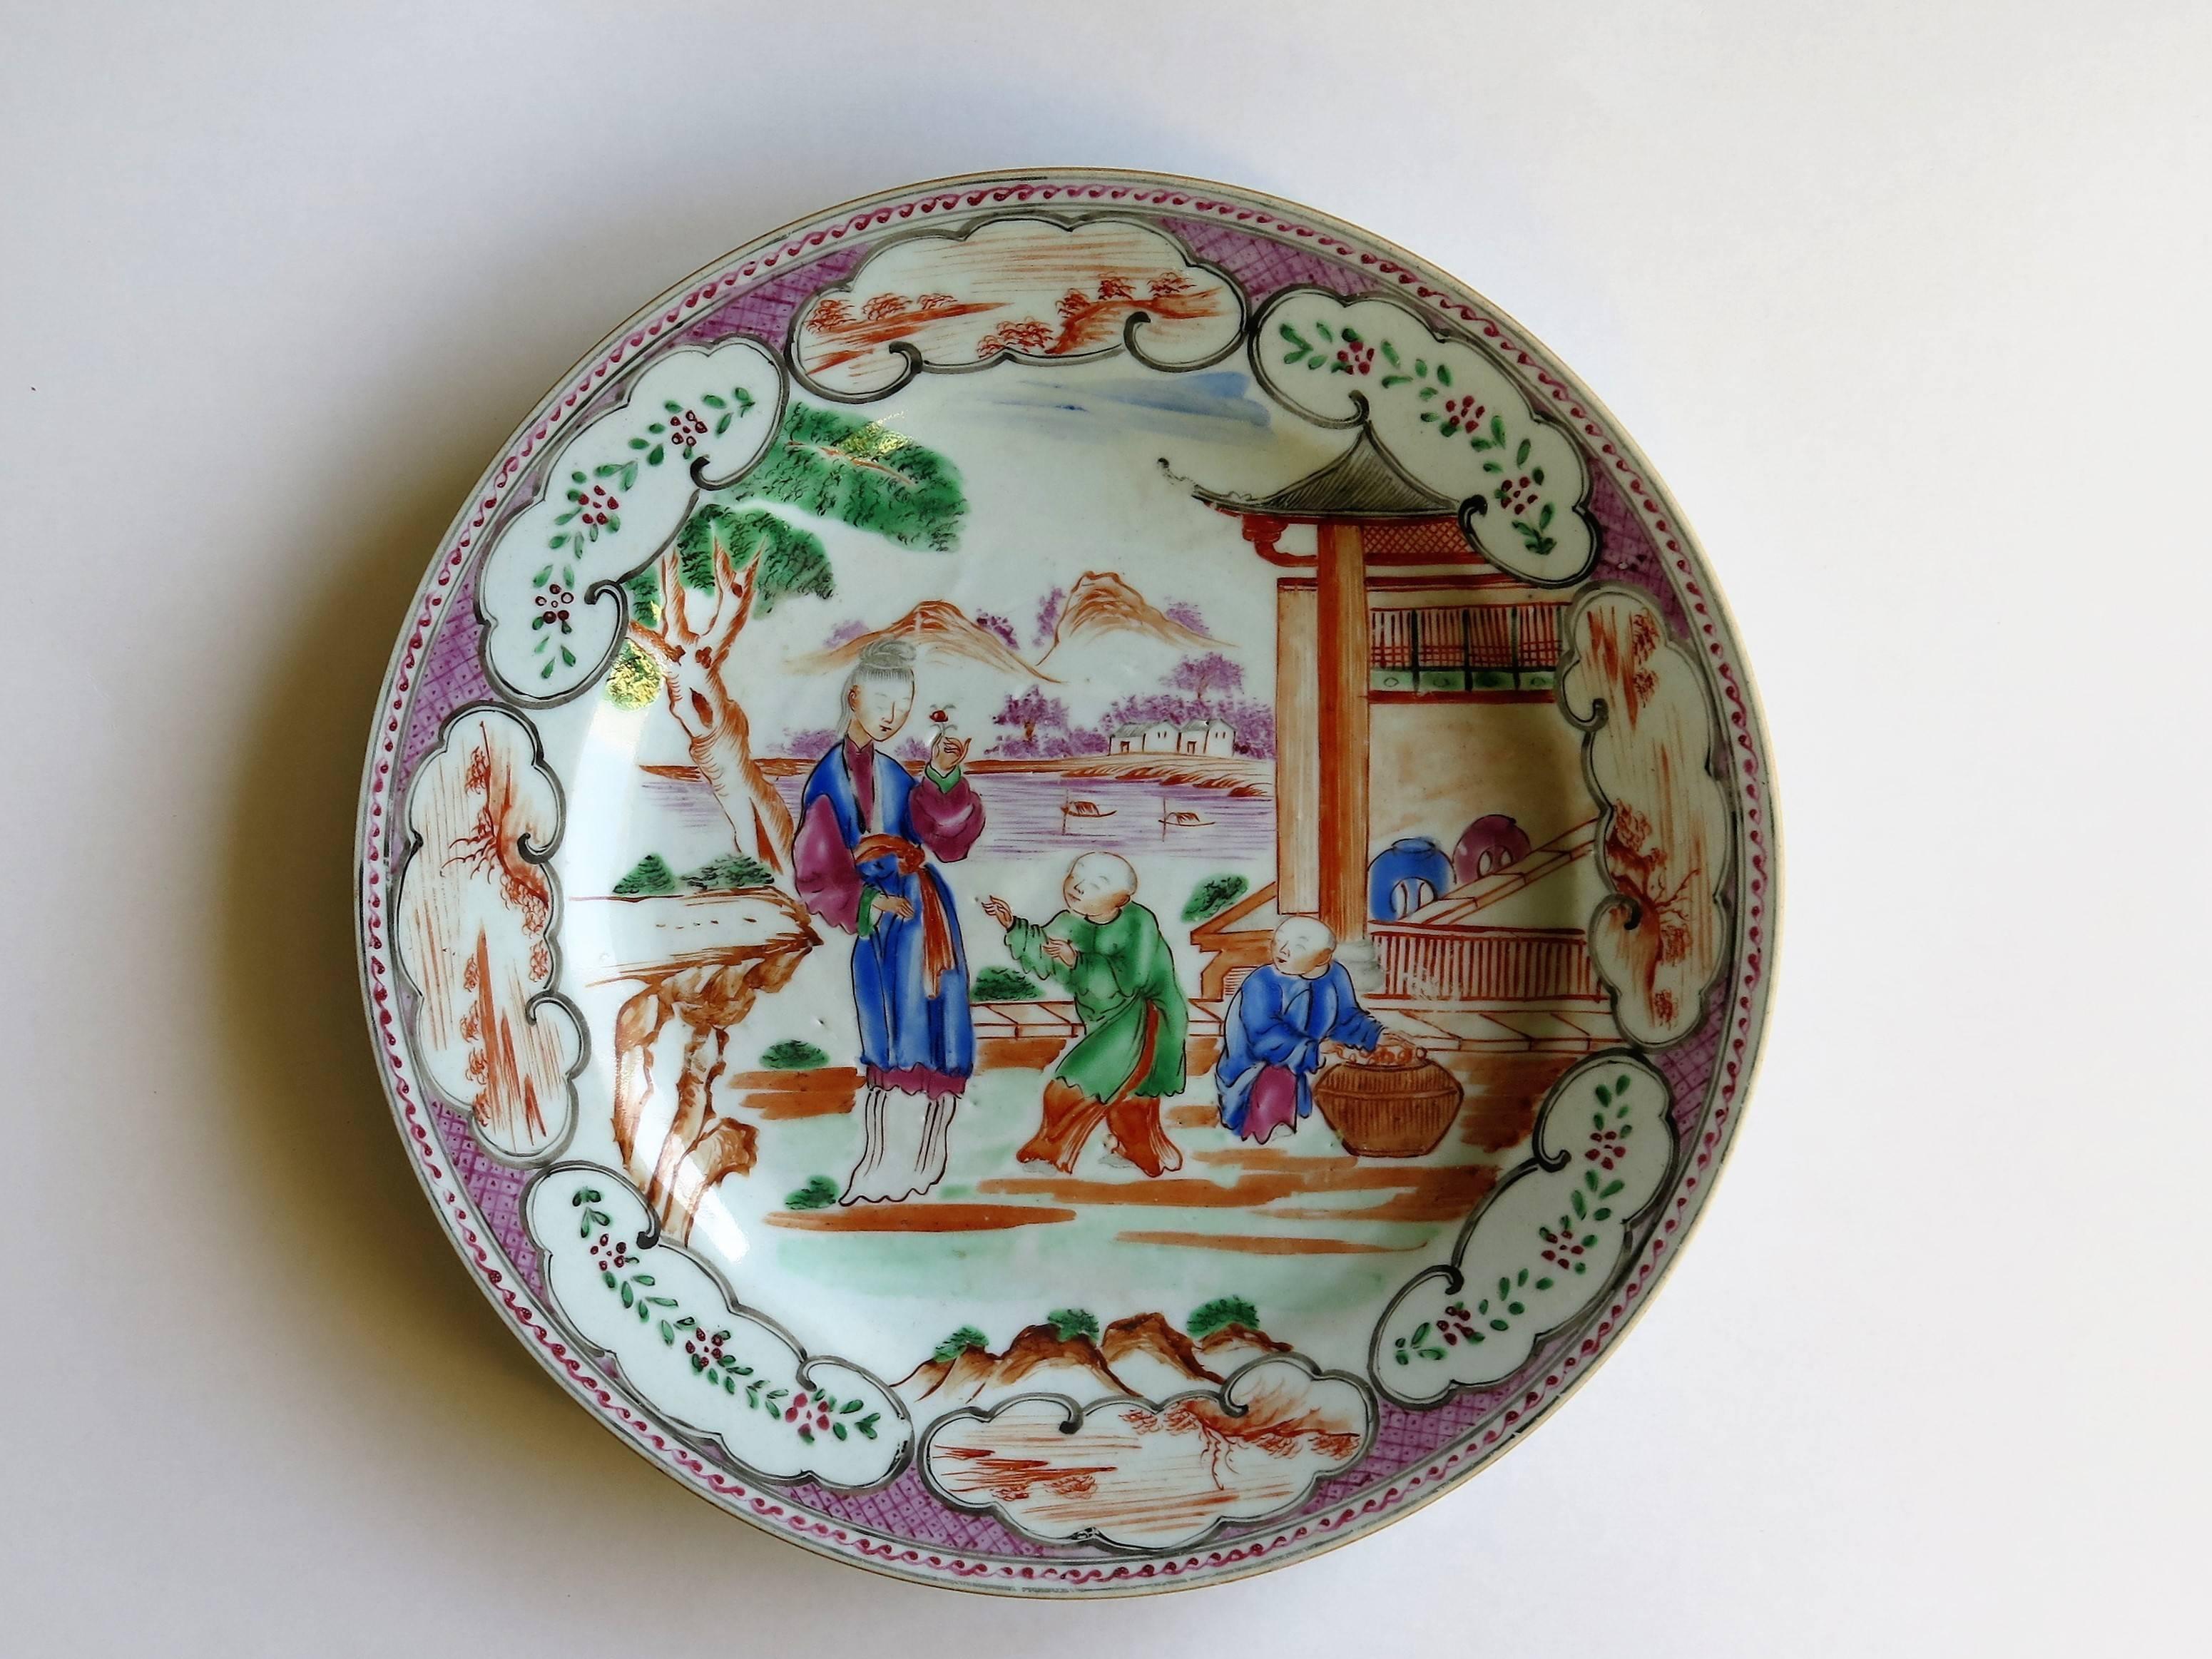 Chinoiserie 18th Century Chinese Porcelain Plate, Famille Rose, Long Eliza, Qing Qianlong